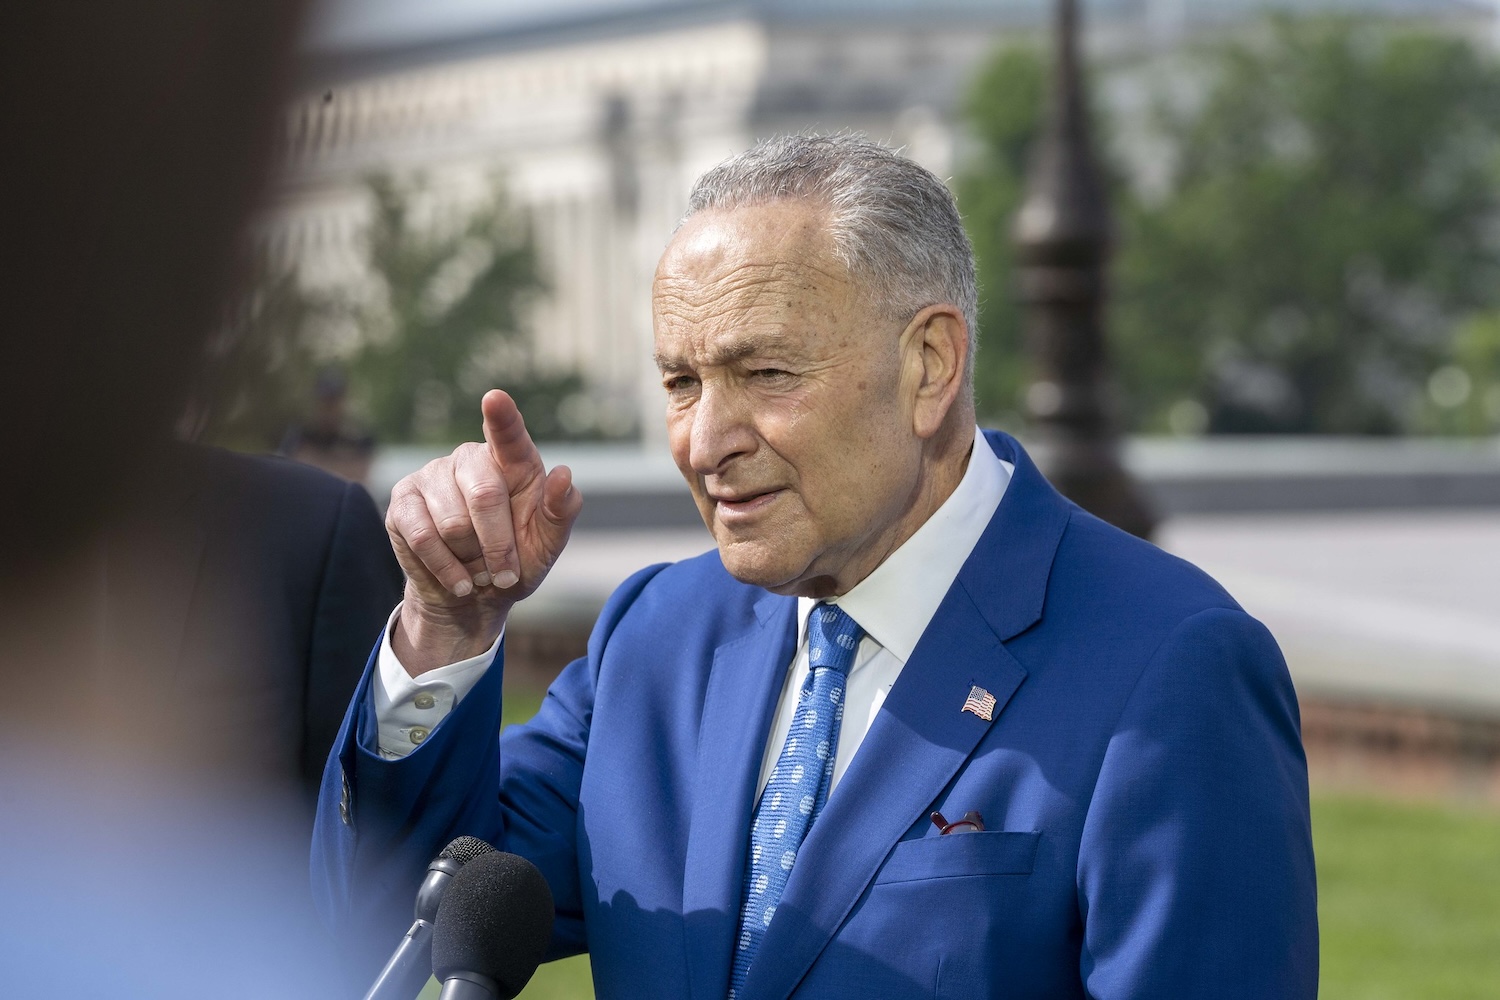 Chuck Schumer’s sibling employed at firm linked to Bragg’s Trump indictment